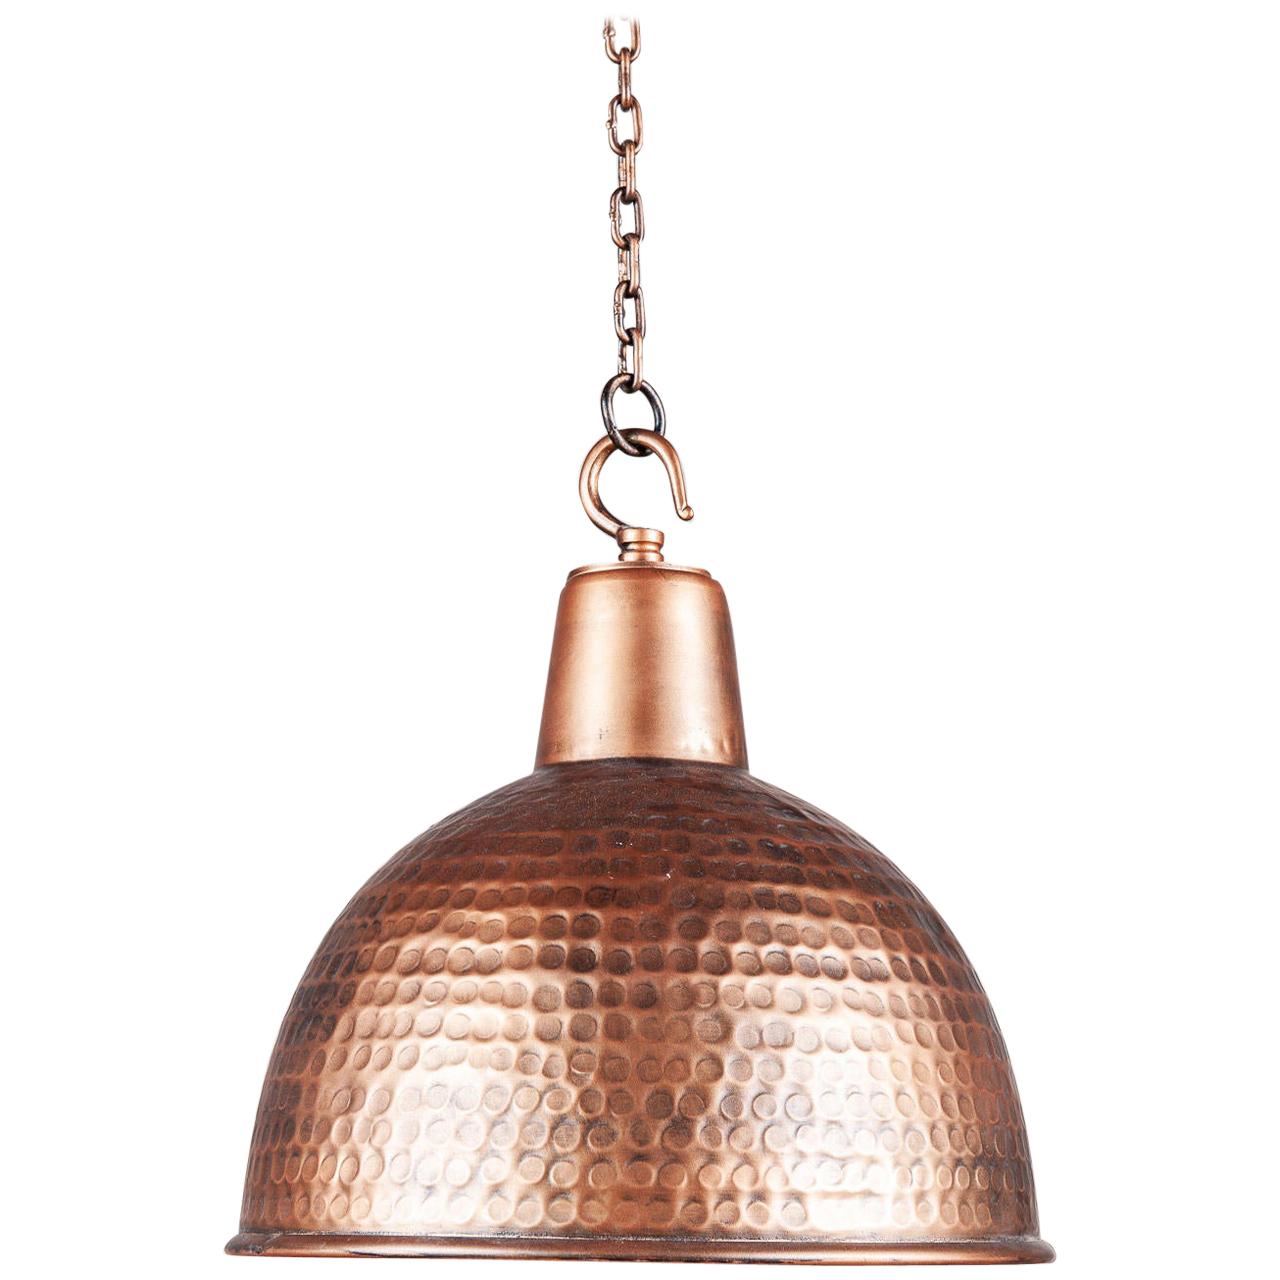 Copper Colored Textured Ceiling Light, 20th Century For Sale